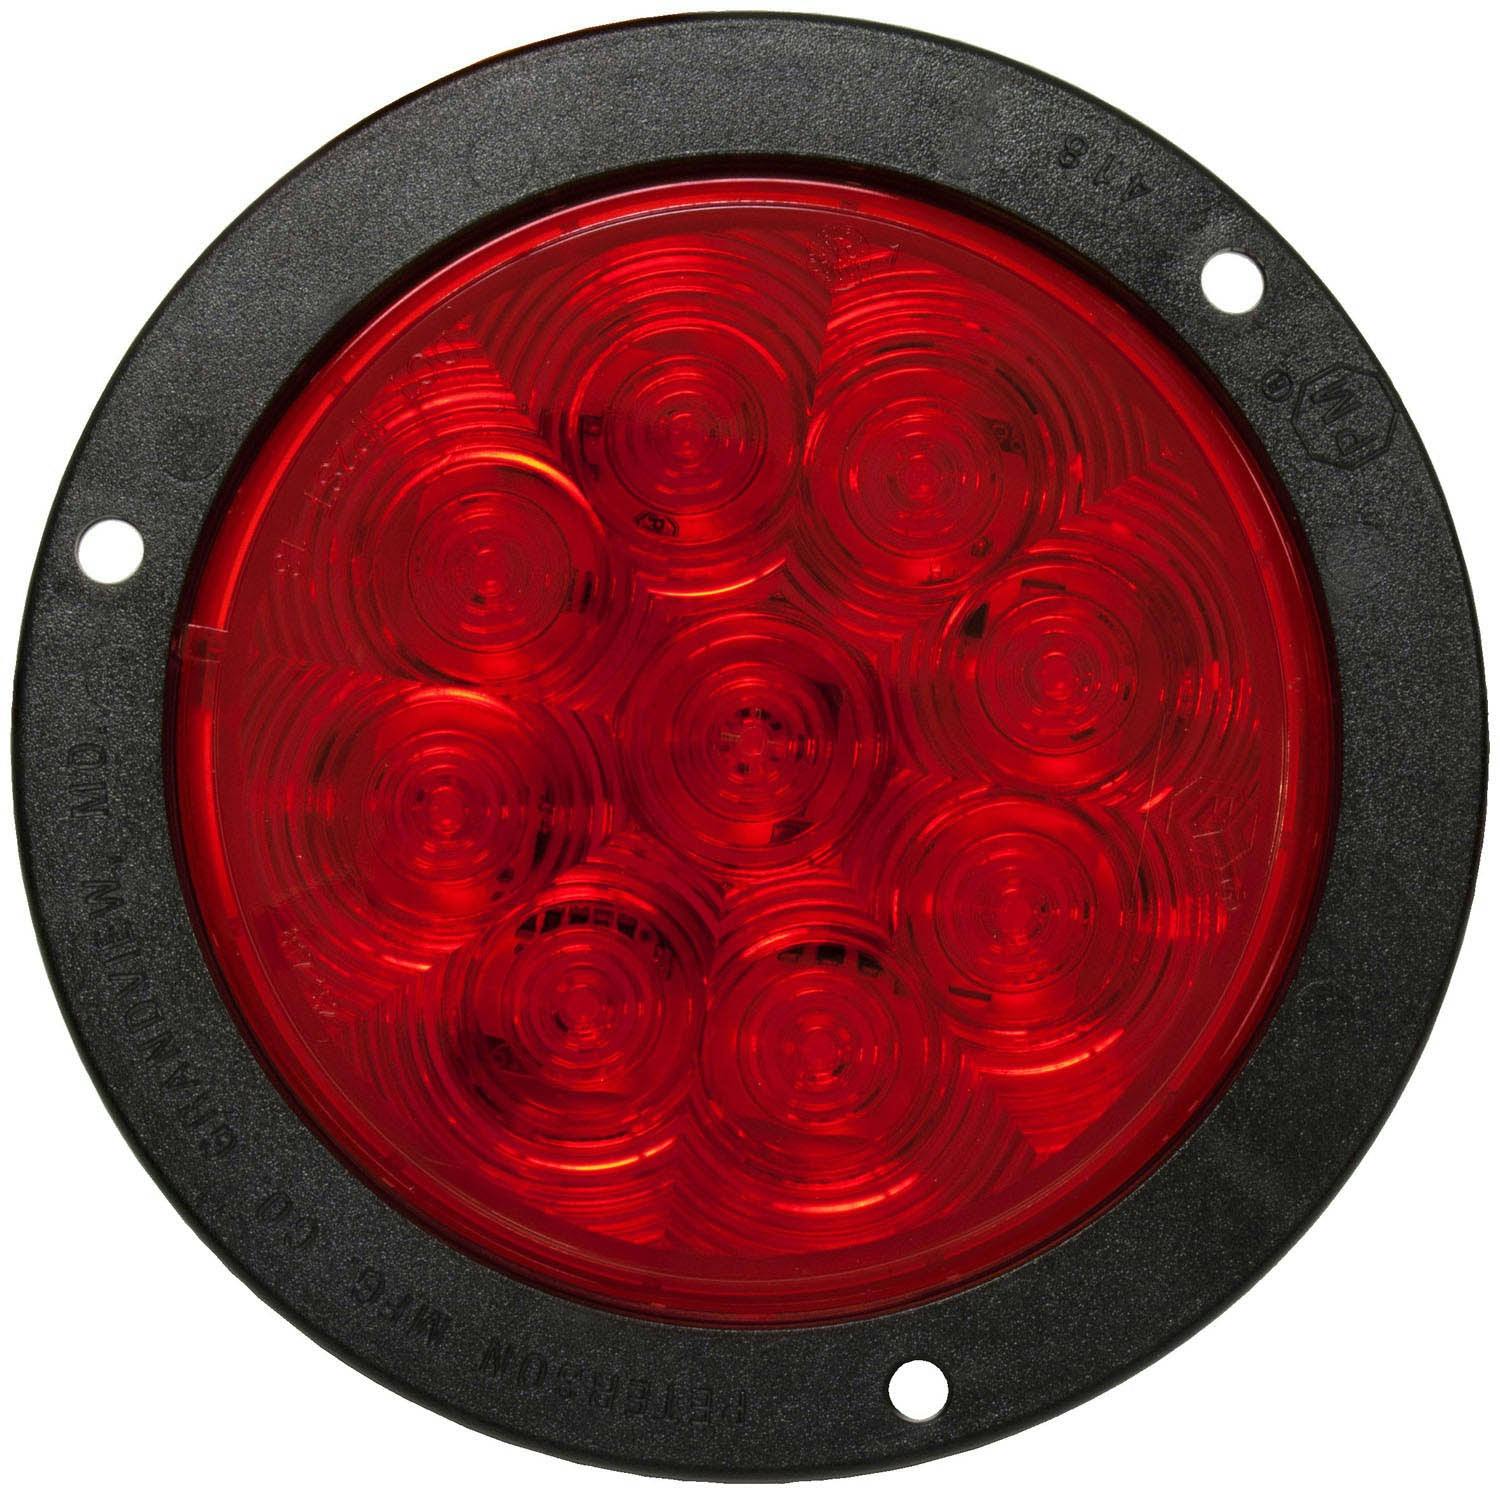 LED Stop/Turn/Tail, Round, Flange-Mount 4", Multi-volt, red, bulk pack (Pack of 50)